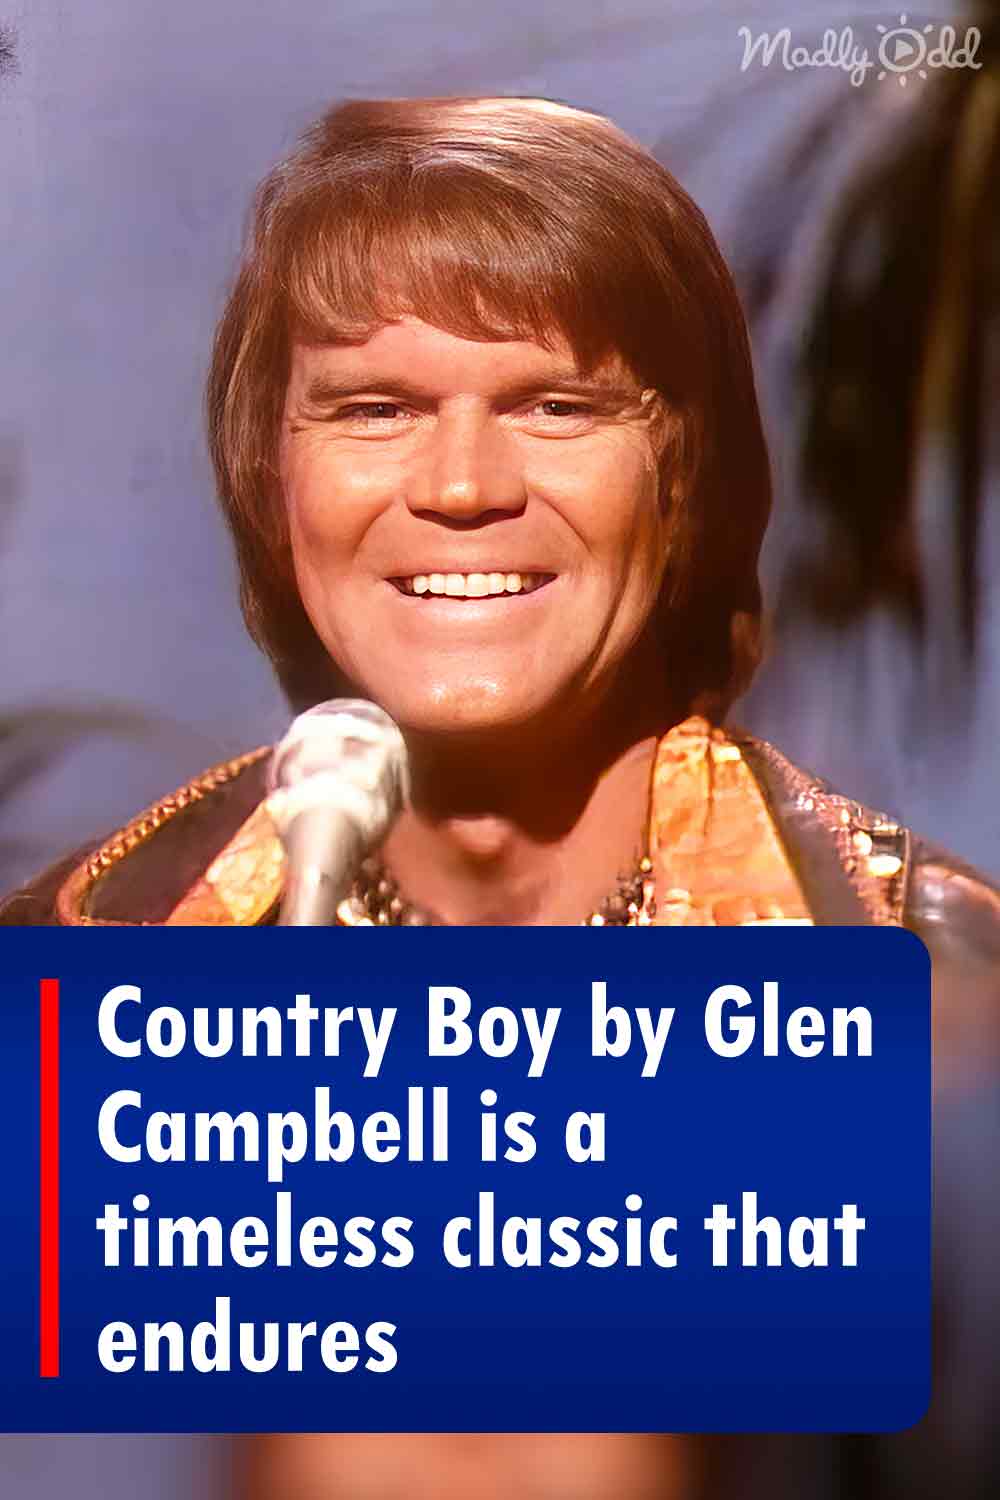 Country Boy by Glen Campbell is a timeless classic that endures